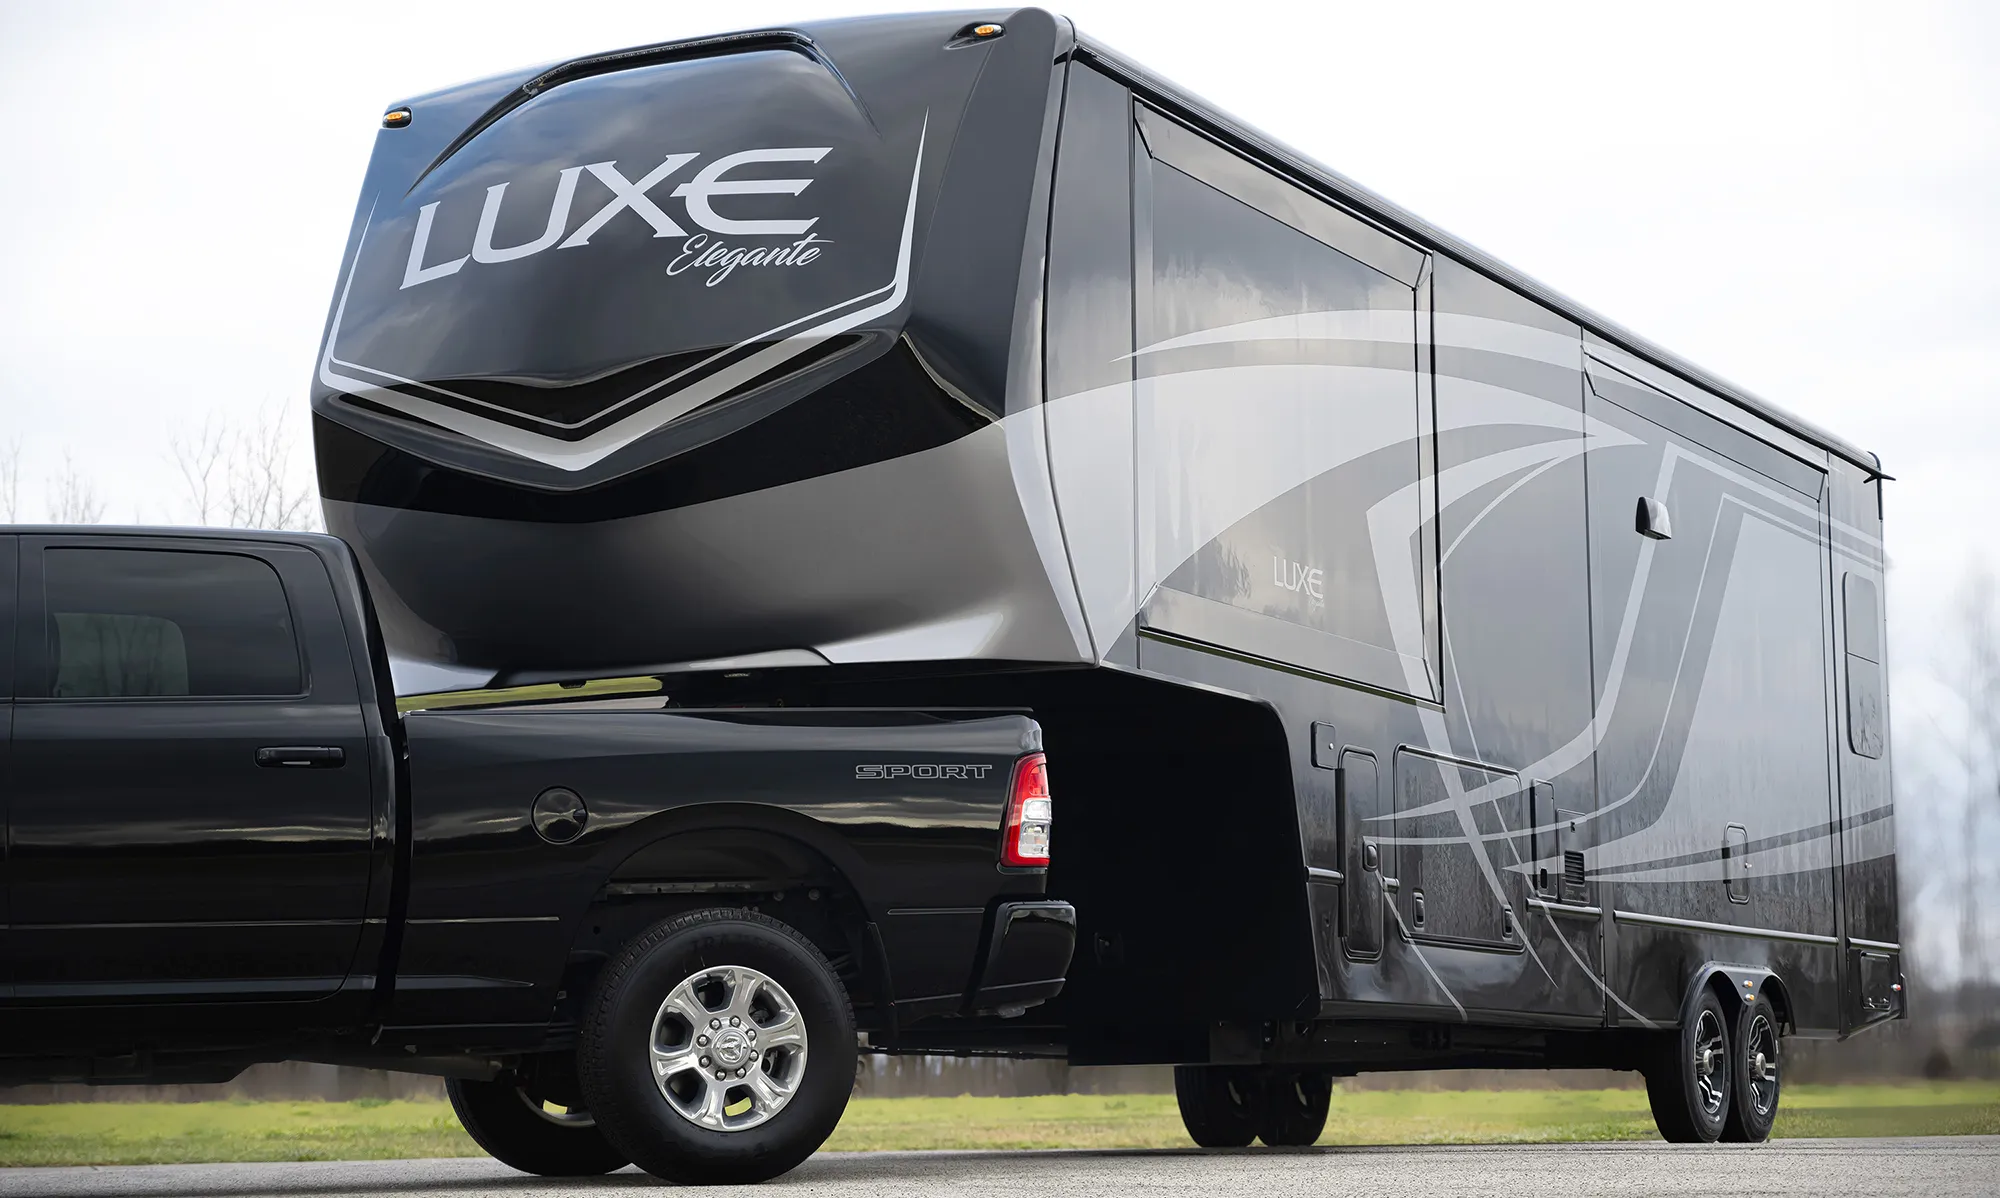 The Luxe Elegante 5th Wheel being towed by a single rear wheel truck.